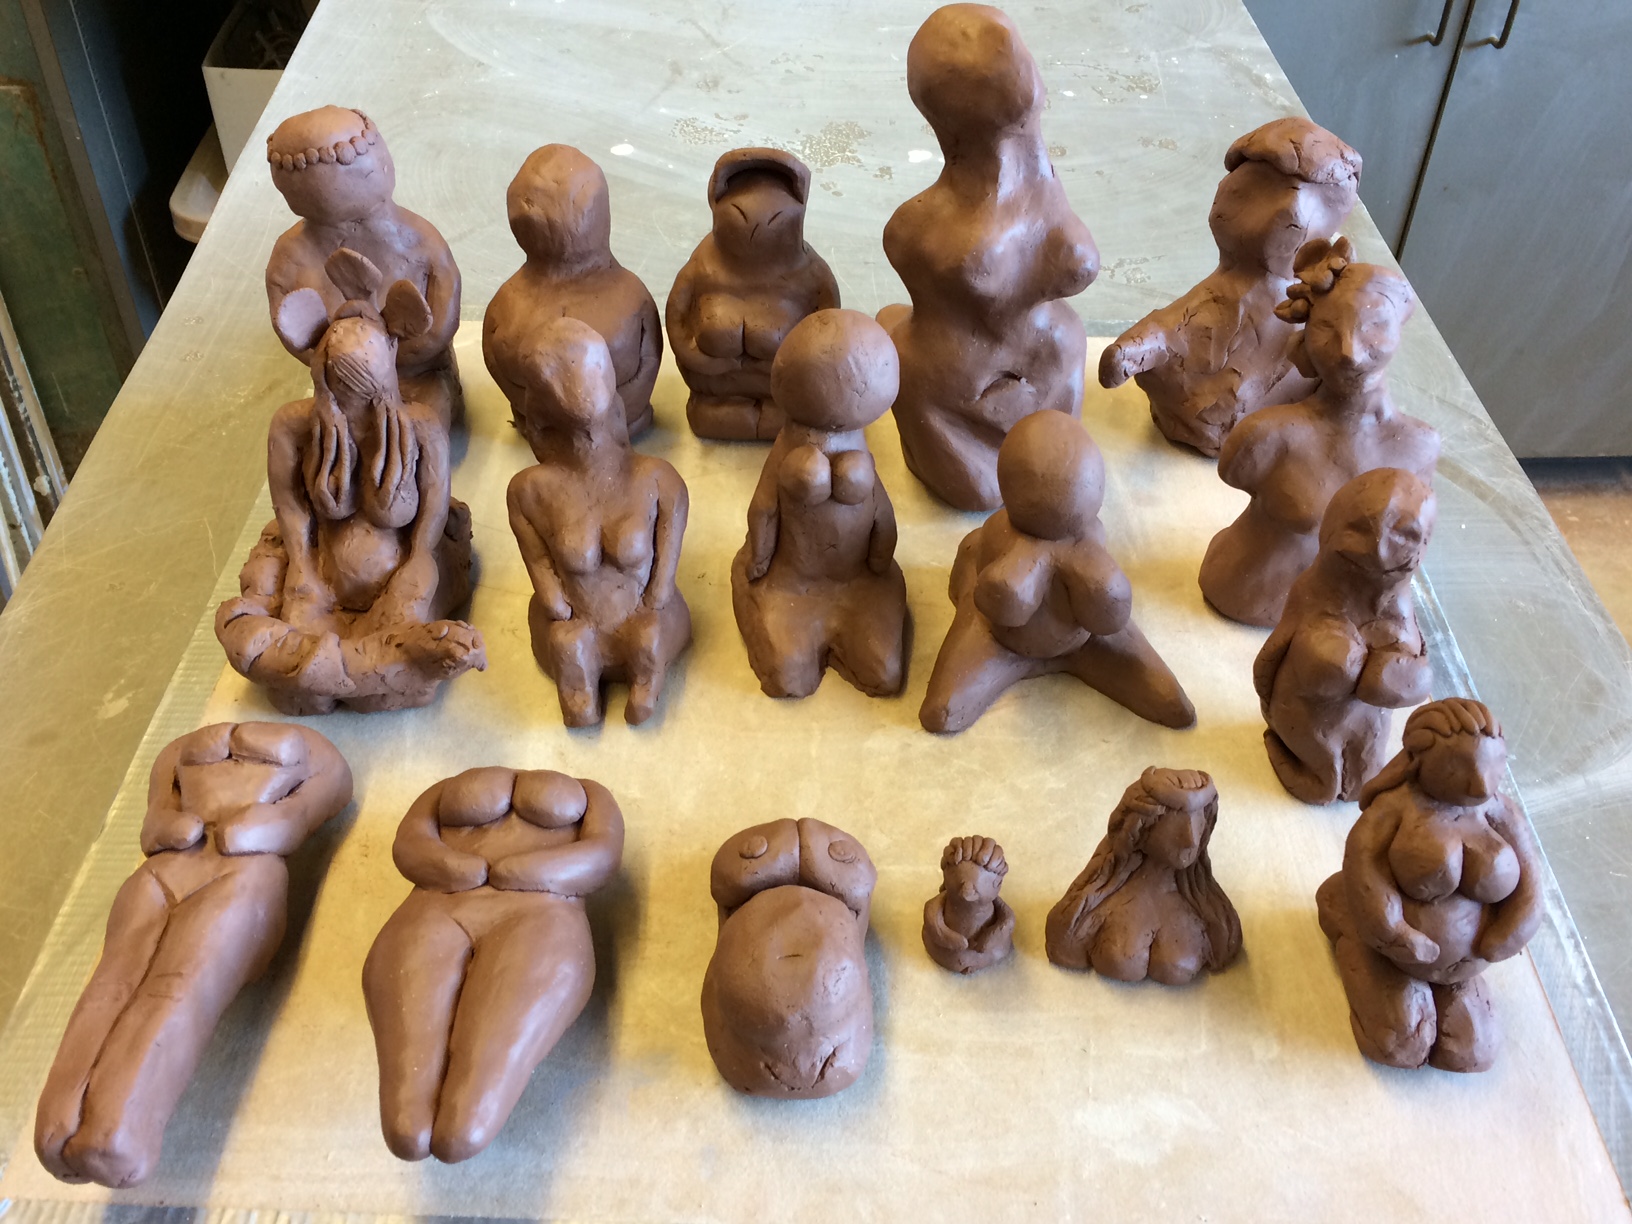 Working with Clay in Art History